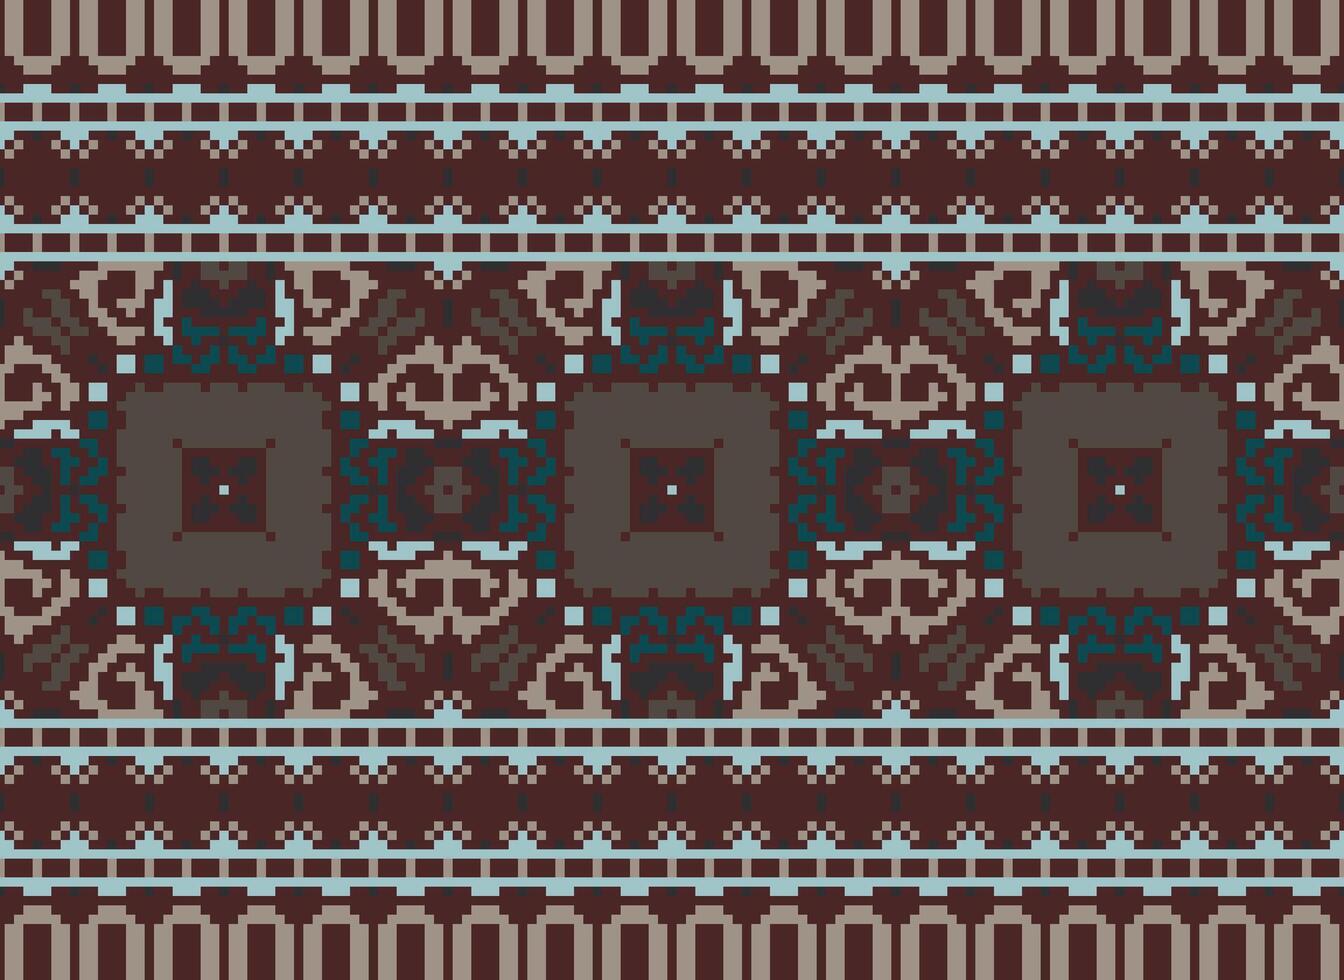 Ethnic geometric fabric pattern Cross Stitch.Ikat embroidery Ethnic oriental Pixel pattern blue background. Abstract,vector,illustration. Texture,clothing,frame,decoration,motifs,silk wallpaper. vector